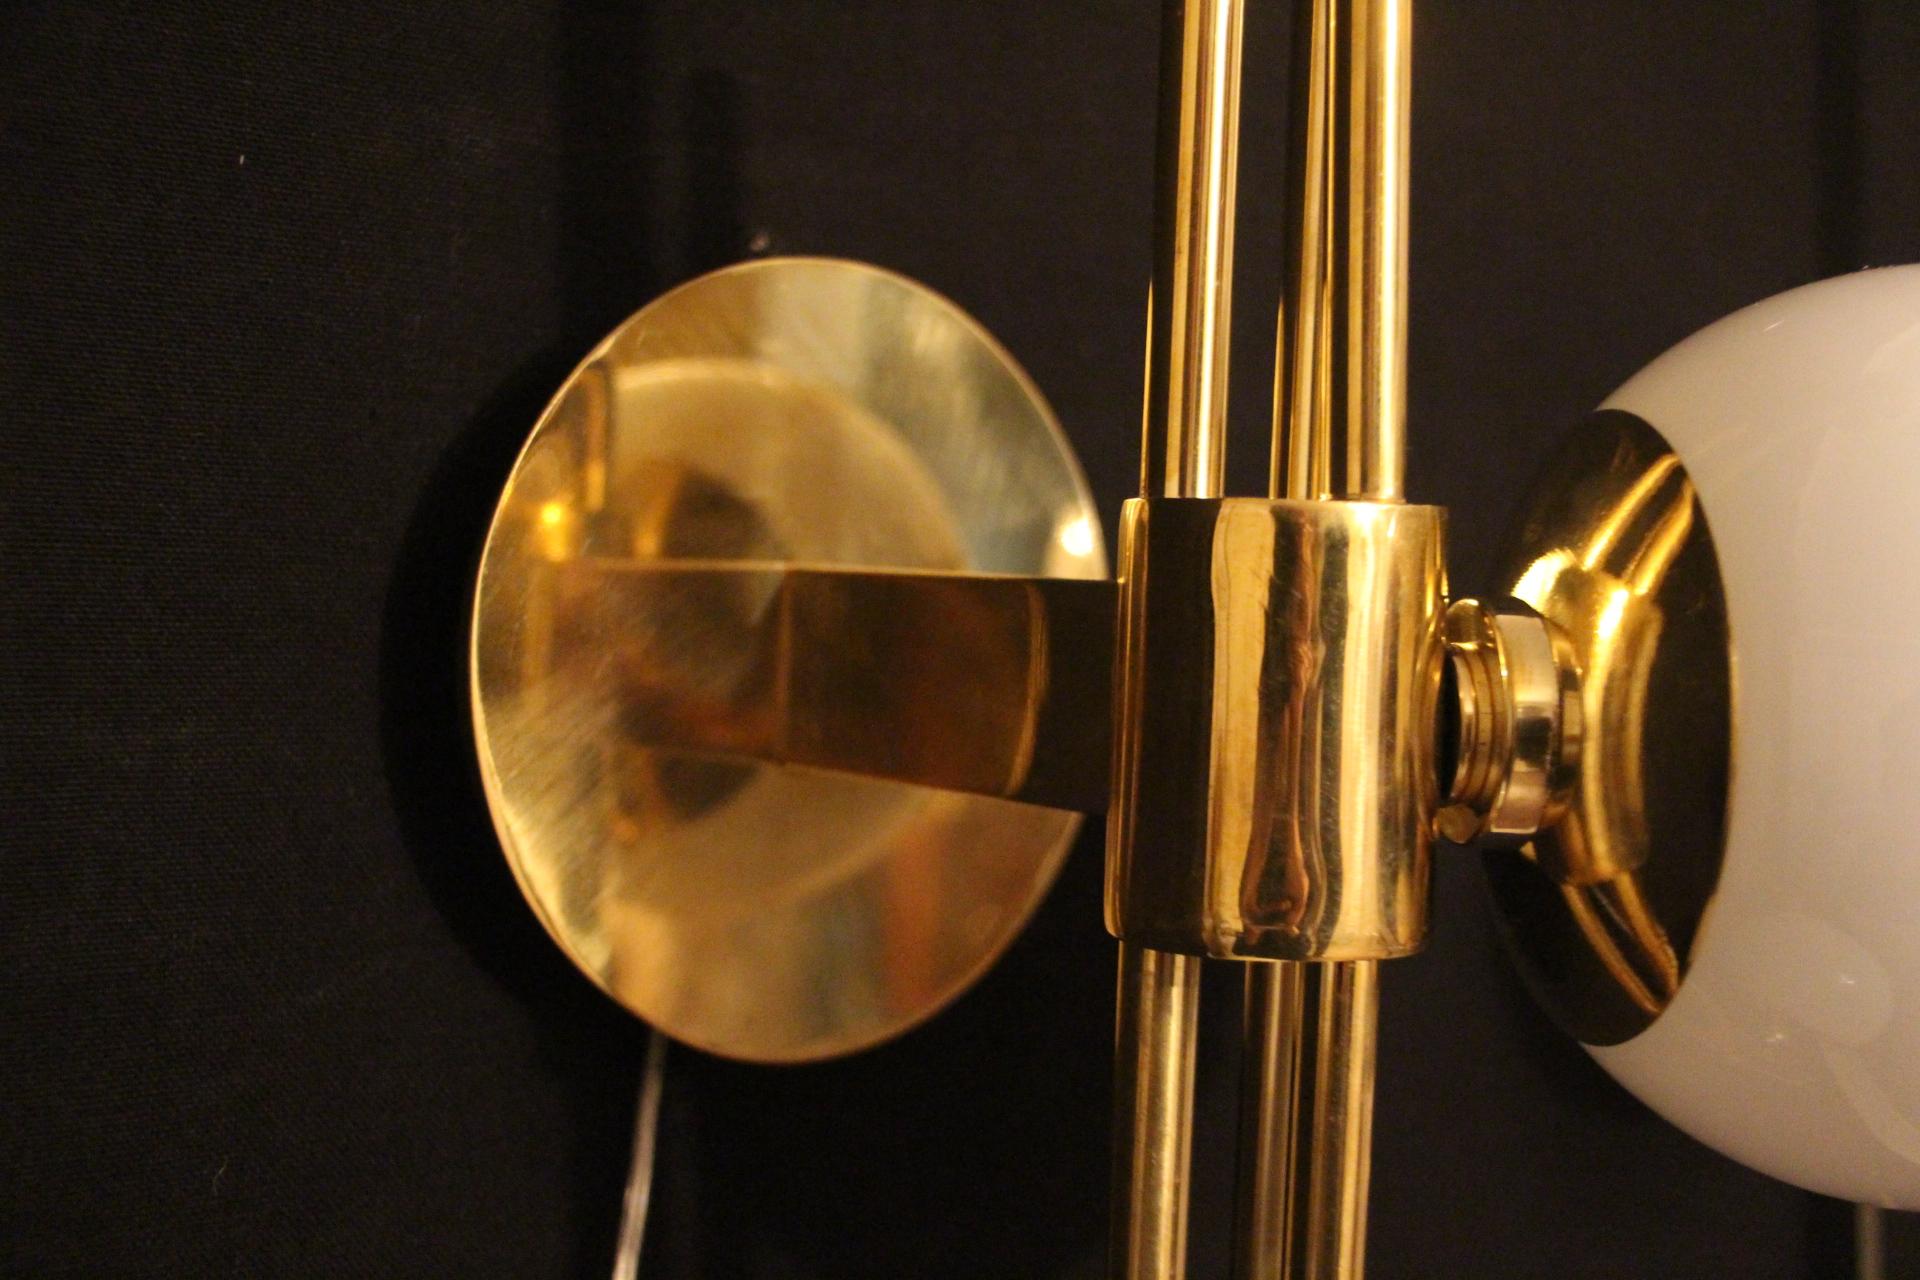 20th Century Modern Pair of Brass and White Glass Sconces, Stilnovo Style Wall Lights